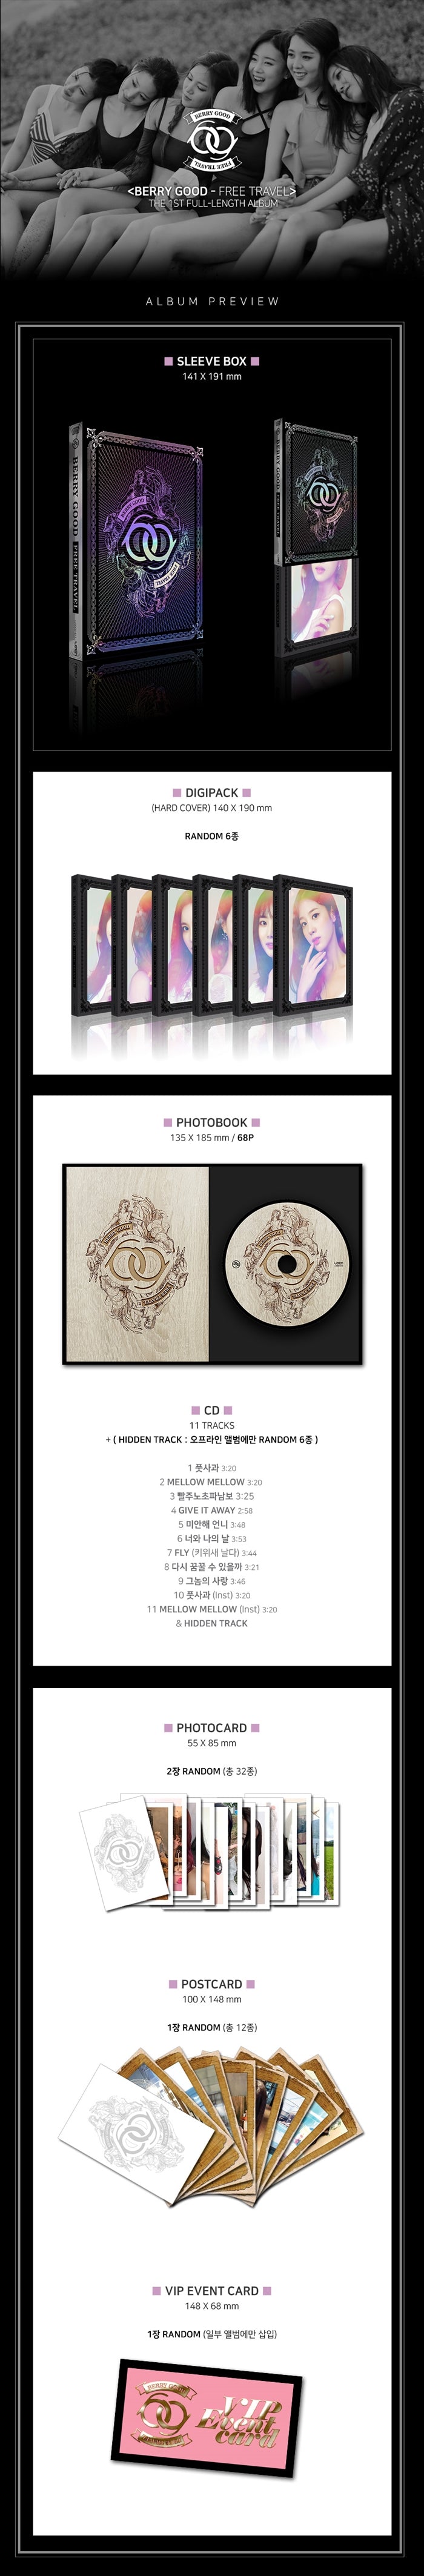 1 CD
1 Photo Book (68 pages)
2 Photo Cards
1 Postcard